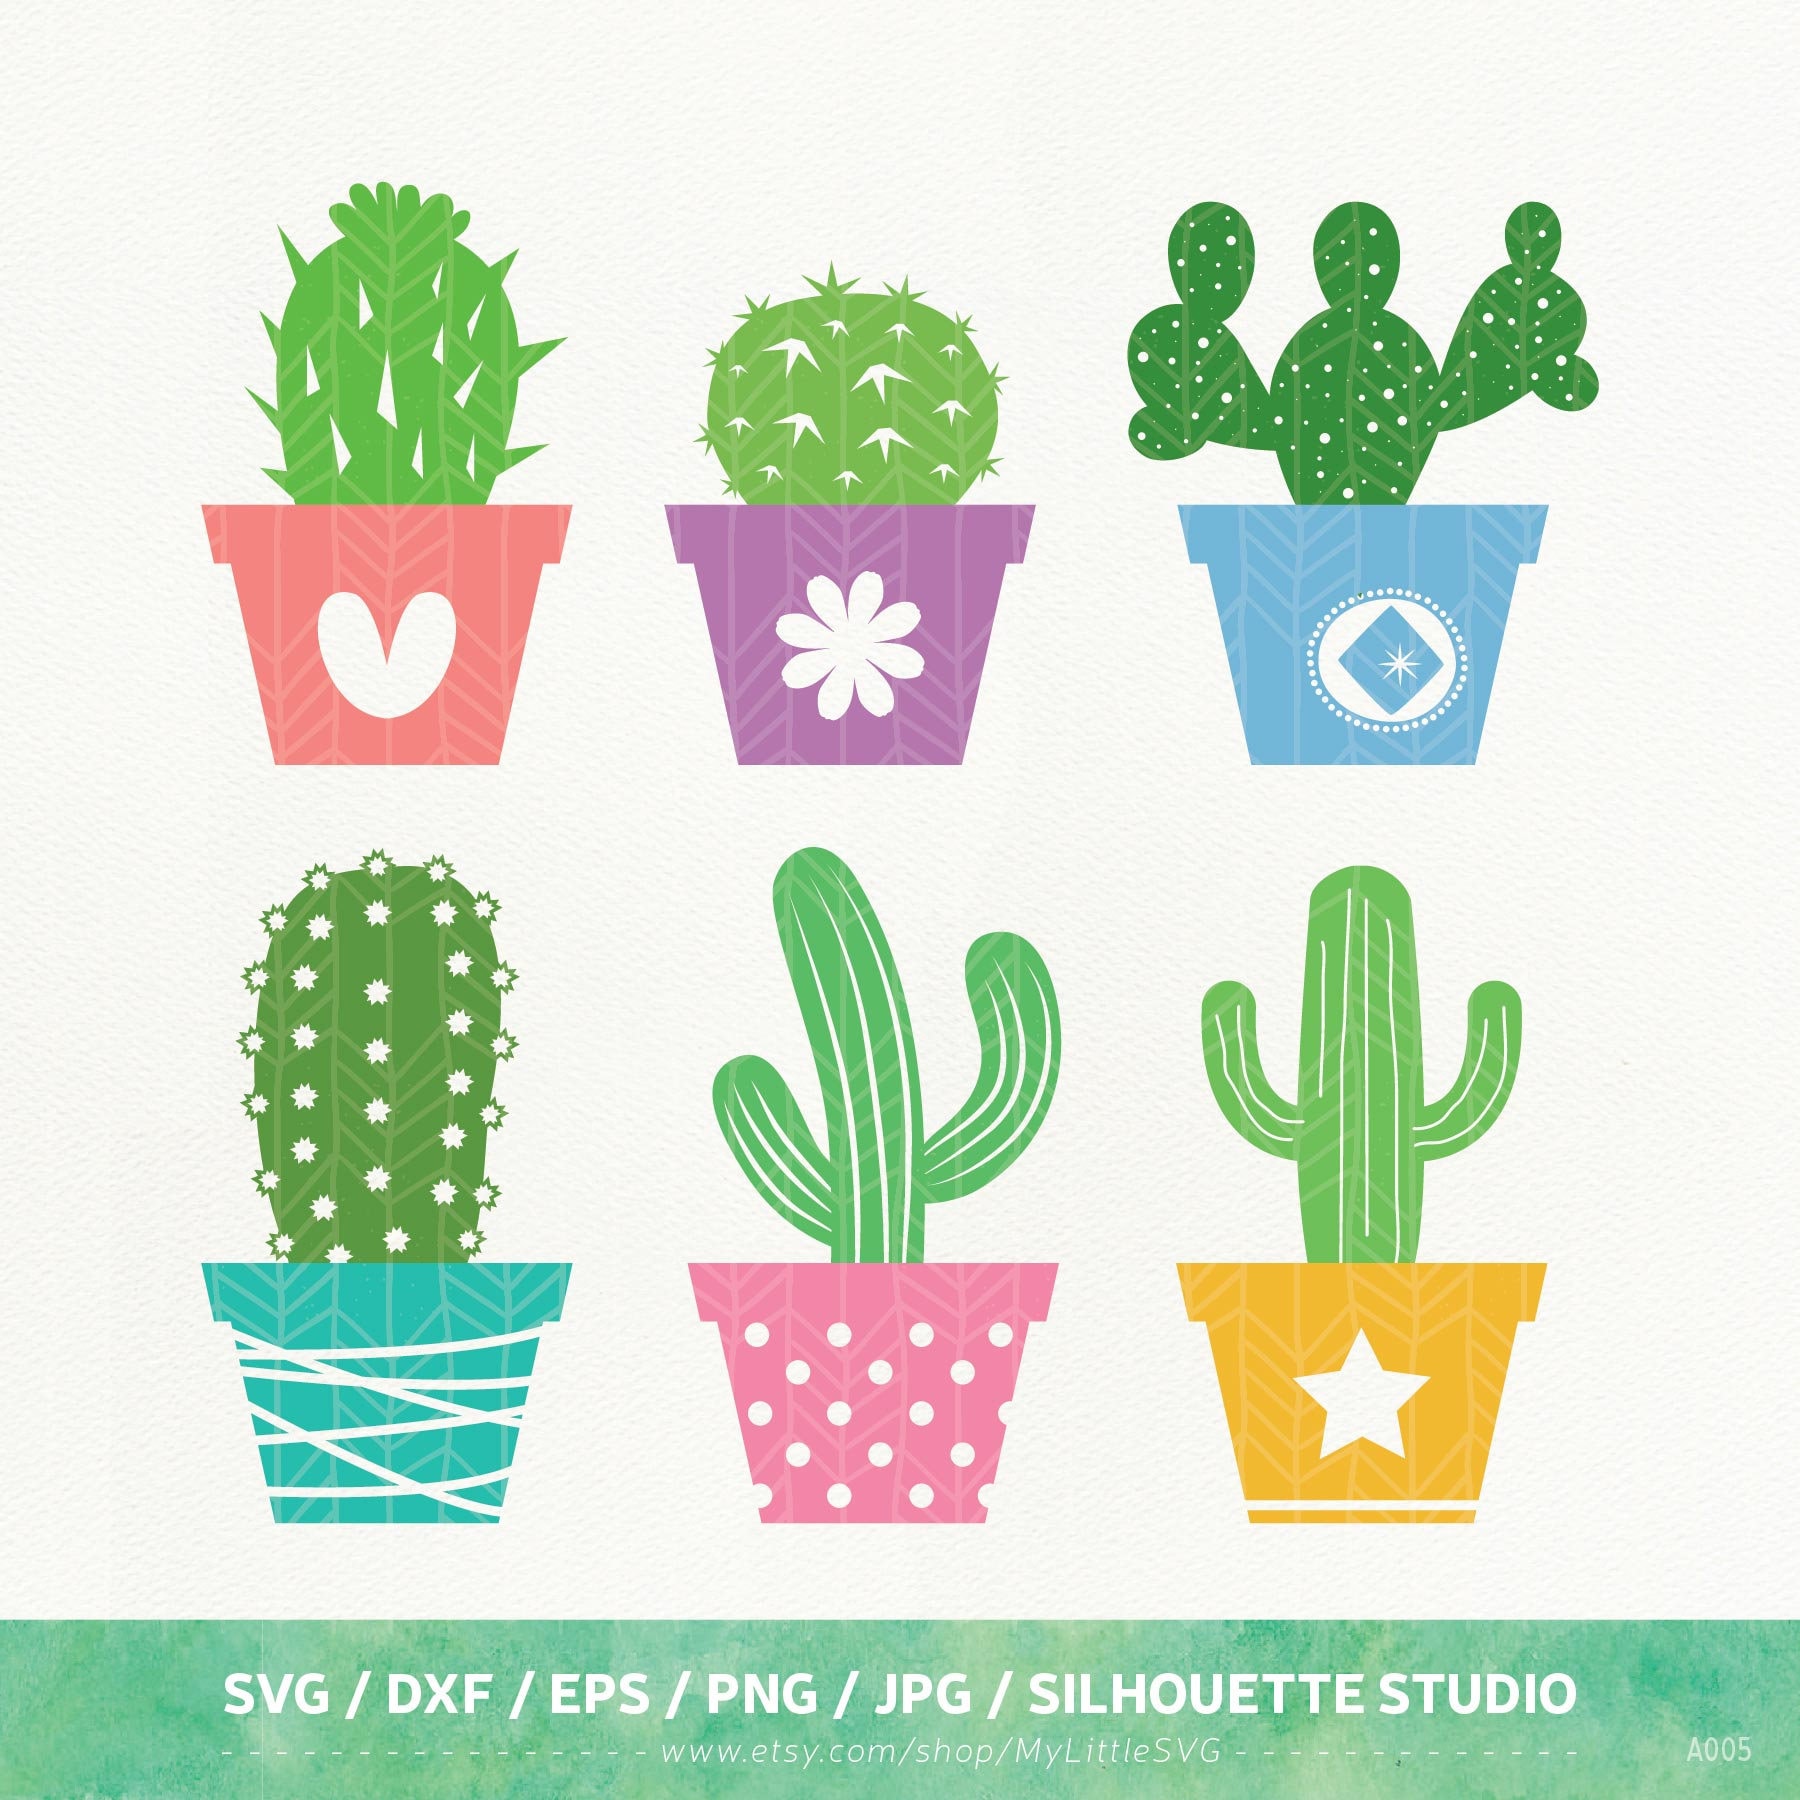 Download Cactus SVG Files Cactus dxf png eps Silhouette Studio | Etsy